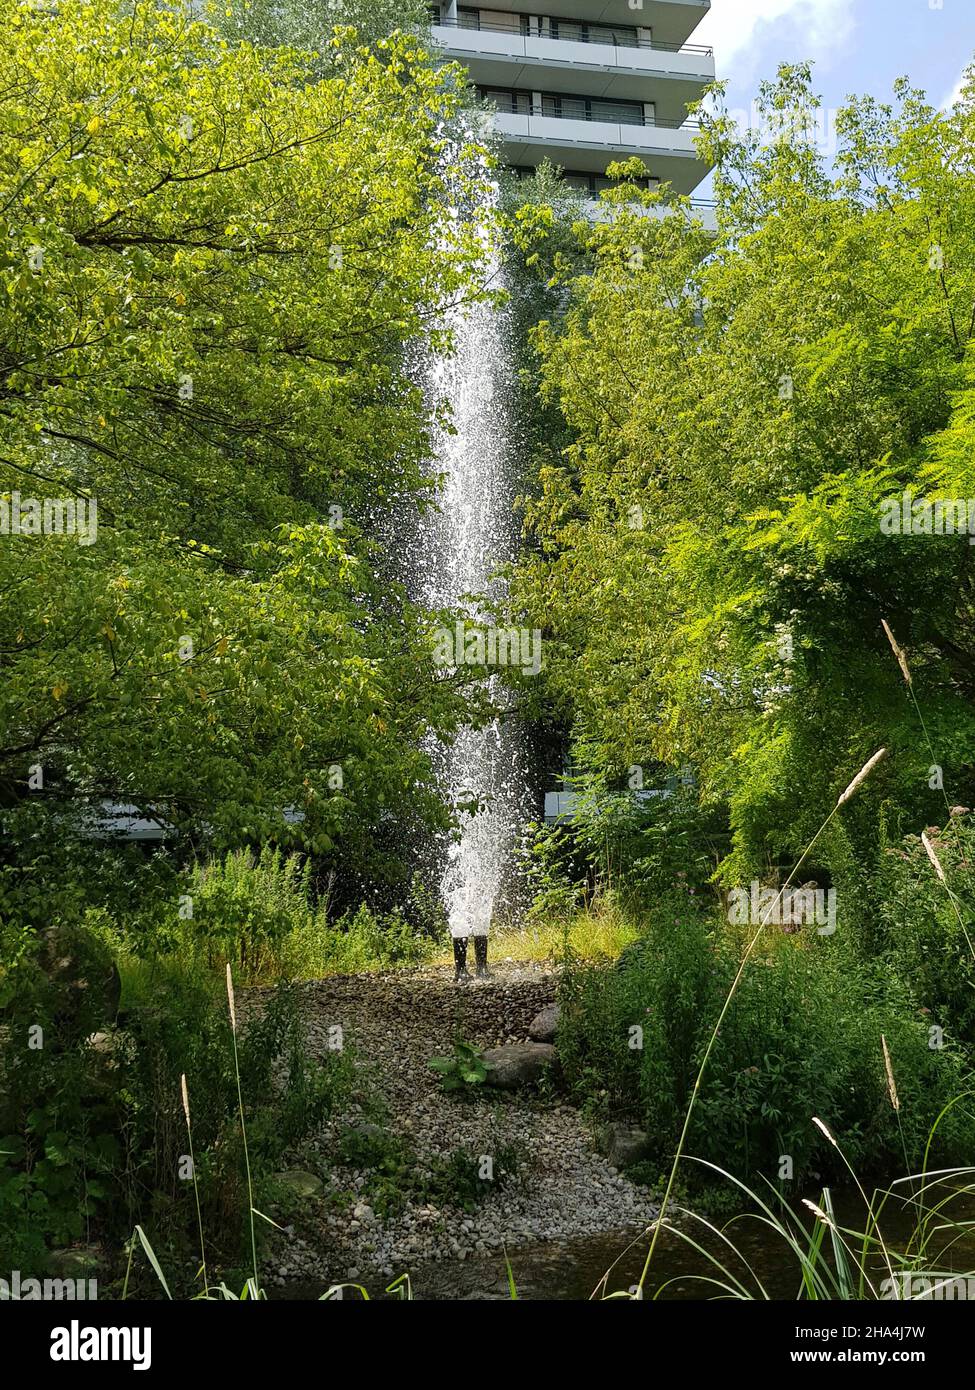 petuelpark,districts of schwabing / milbertshofen,laid out above the petuel tunnel,opened june 22,2004. work of art: a 7 m high fountain shoots out of a pair of rubber boots,artist: roman signer Stock Photo